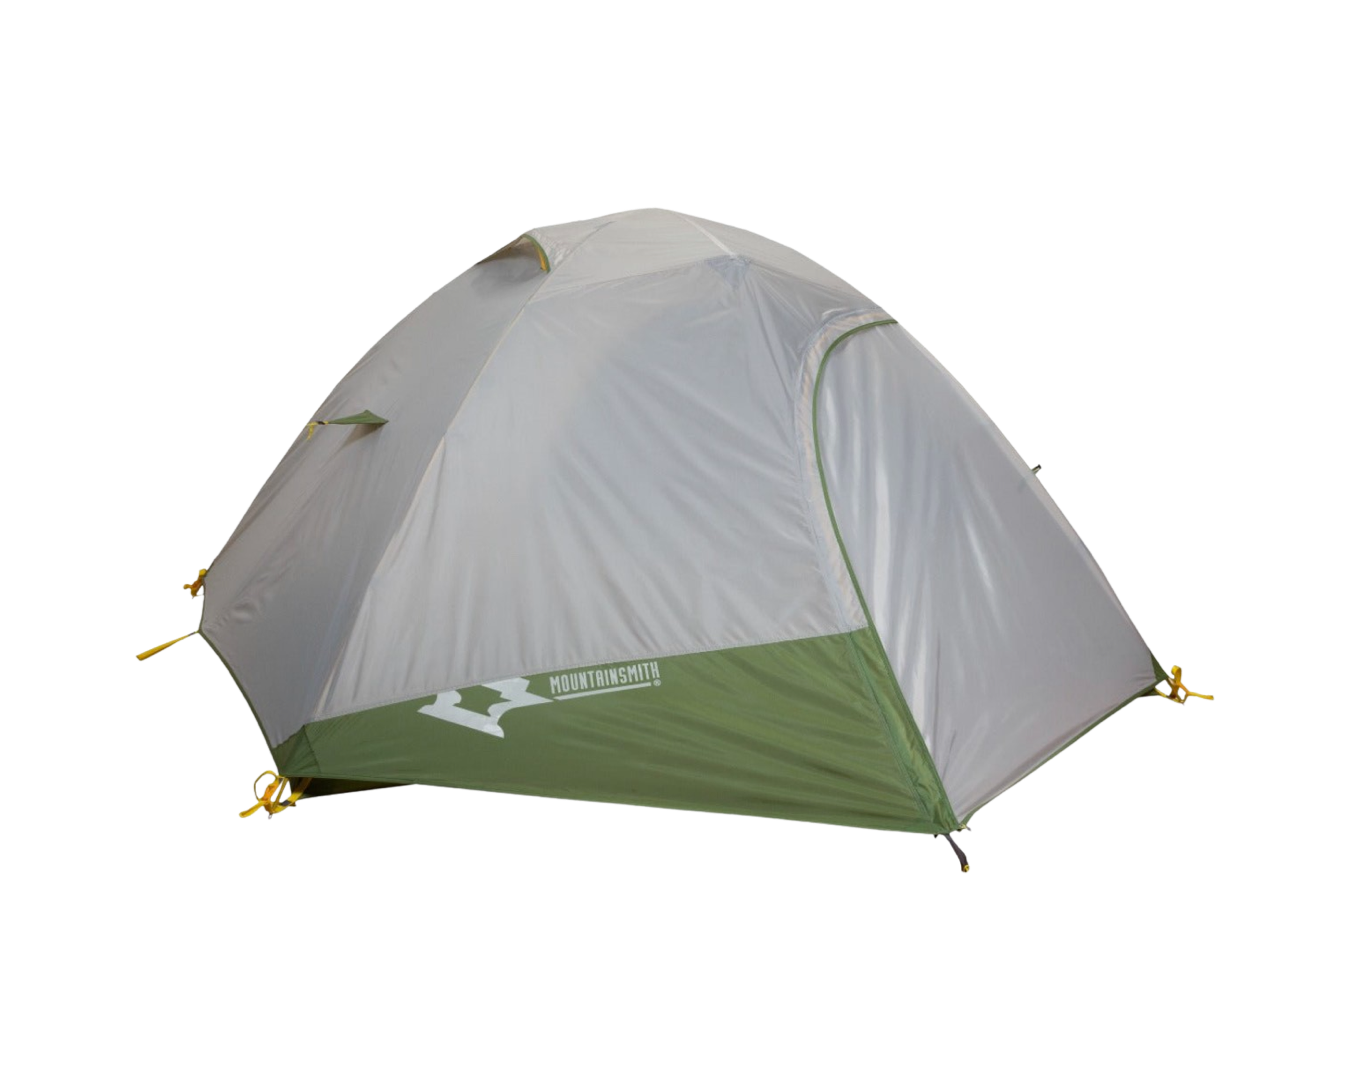 Best Budget 4-Person Backpacking Tent - Mountainsmith Morrison